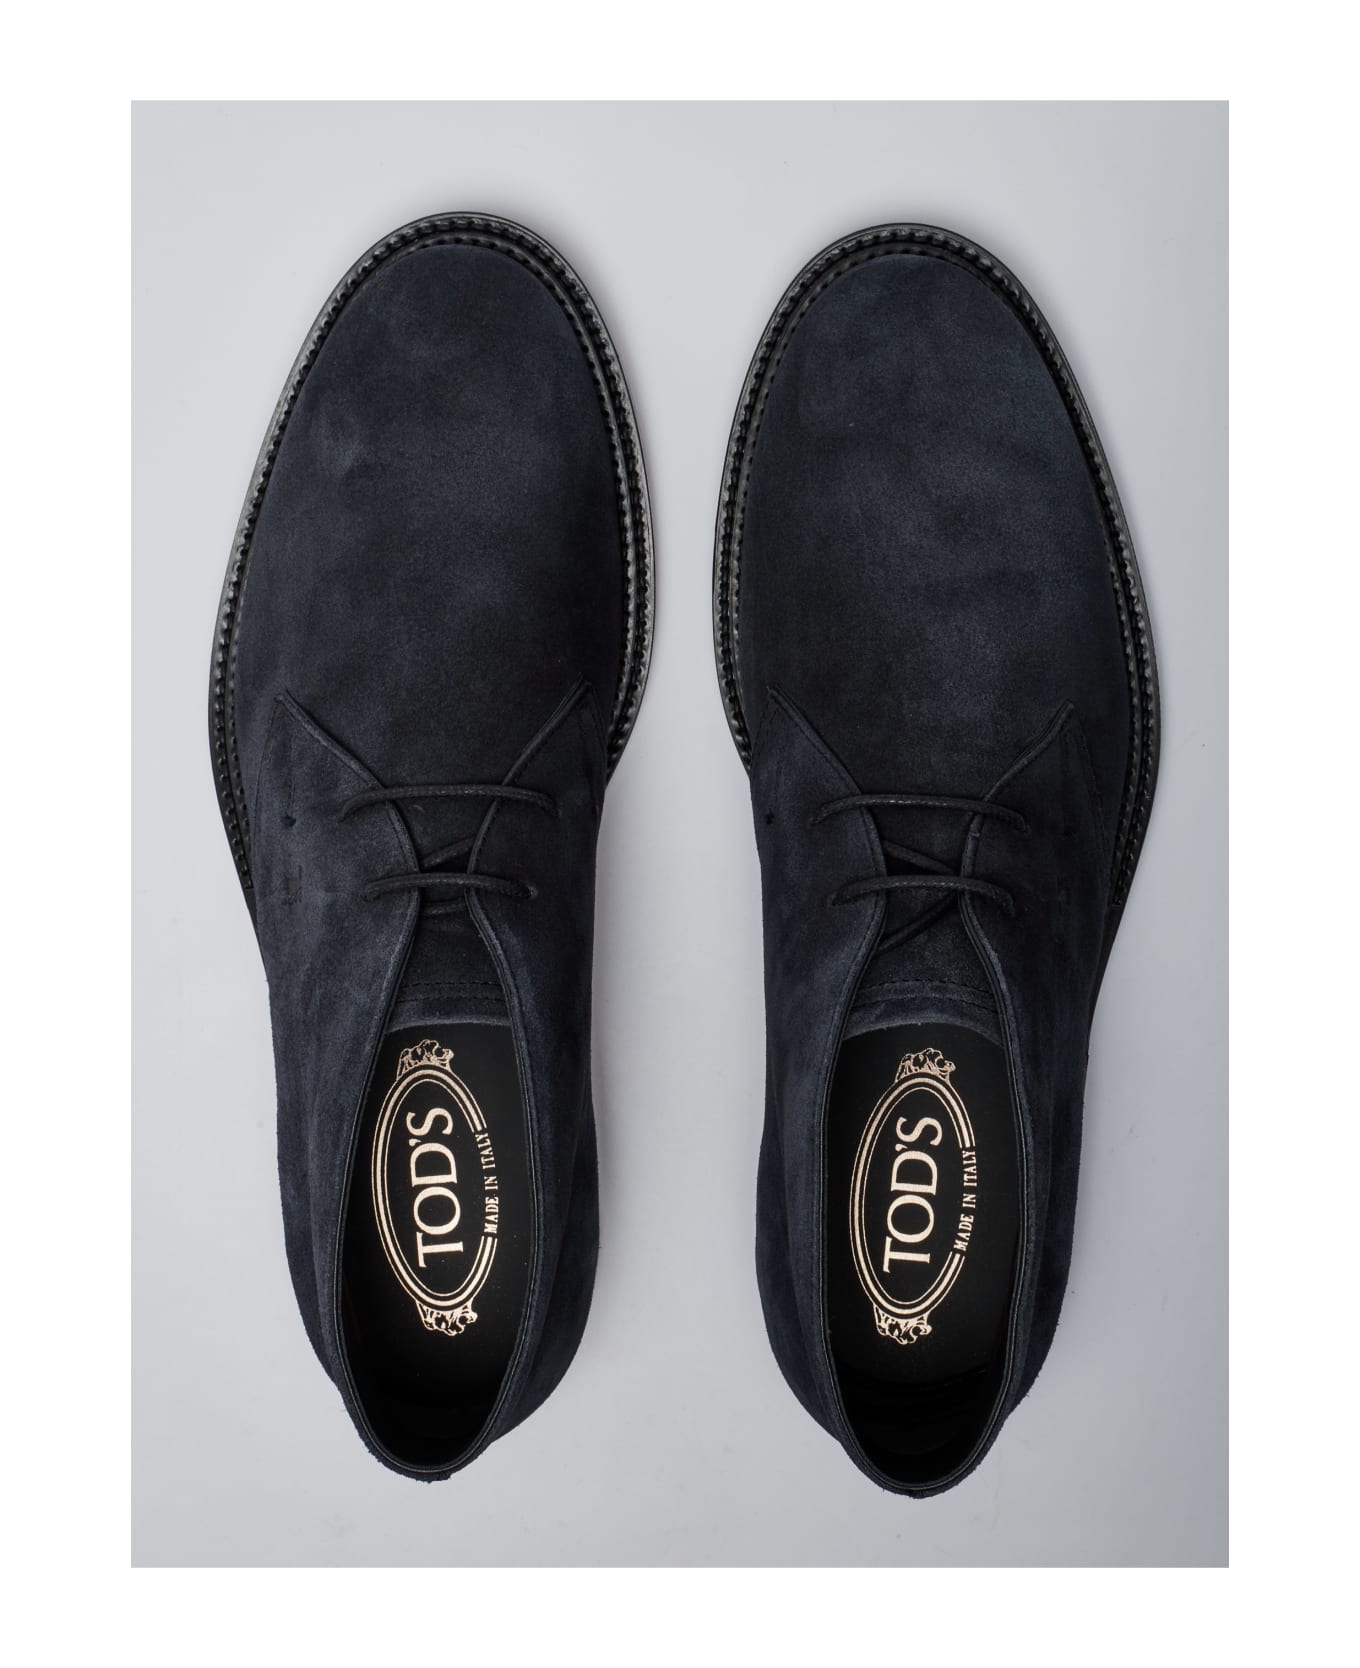 Tod's Polacco Formale 62c Laced Shoe - BLU NOTTE ブーツ